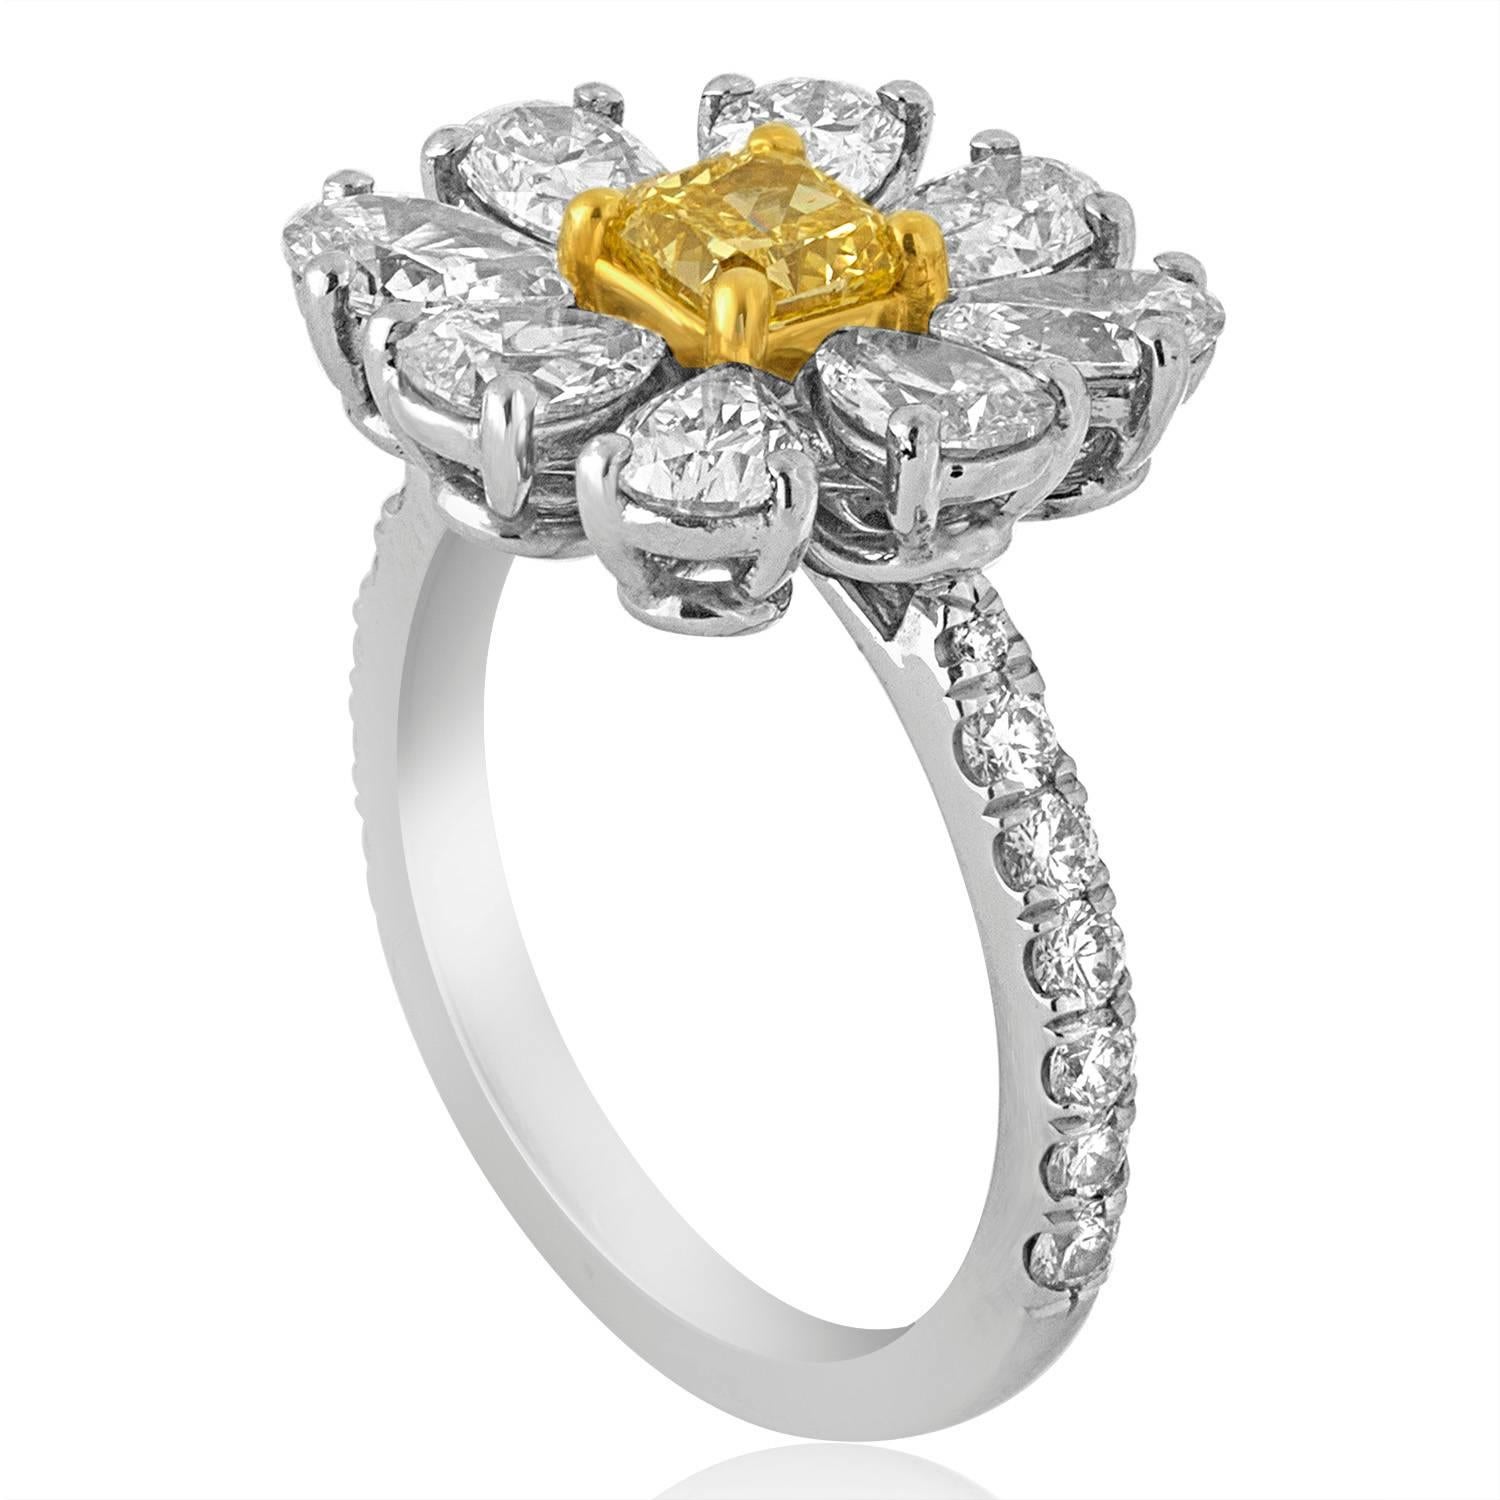 Daisy Flower Ring
The Ring is Platinum 950 & 18K Yellow Gold.
The center stone is FANCY YELLOW VS Quality 0.54 Carats.
There are 2.04 Carats Total in Pear Shapes F VS.
There are 0.35 Carats Total in Small Round Diamonds F VS.
The ring measures